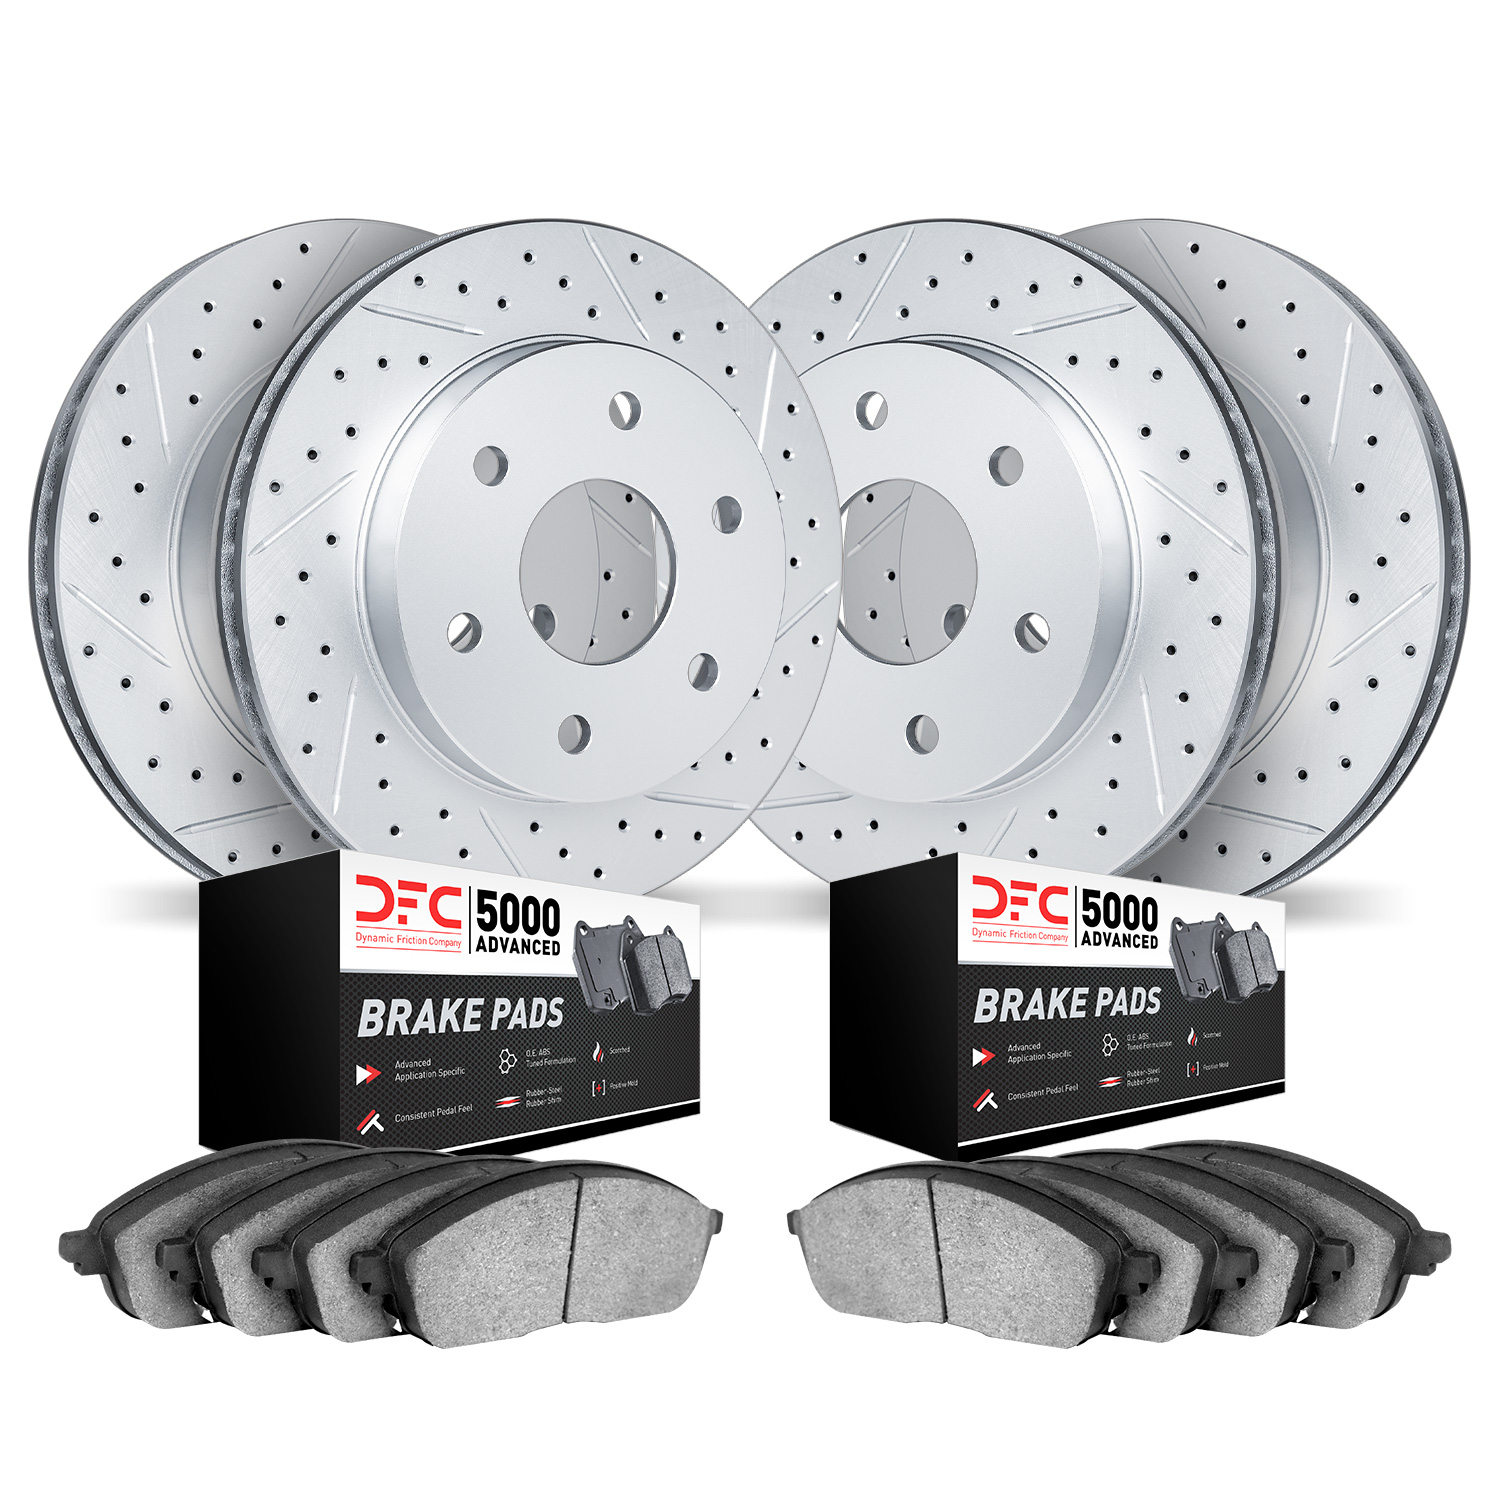 2504-48018 Geoperformance Drilled/Slotted Rotors w/5000 Advanced Brake Pads Kit, 1999-2007 GM, Position: Front and Rear